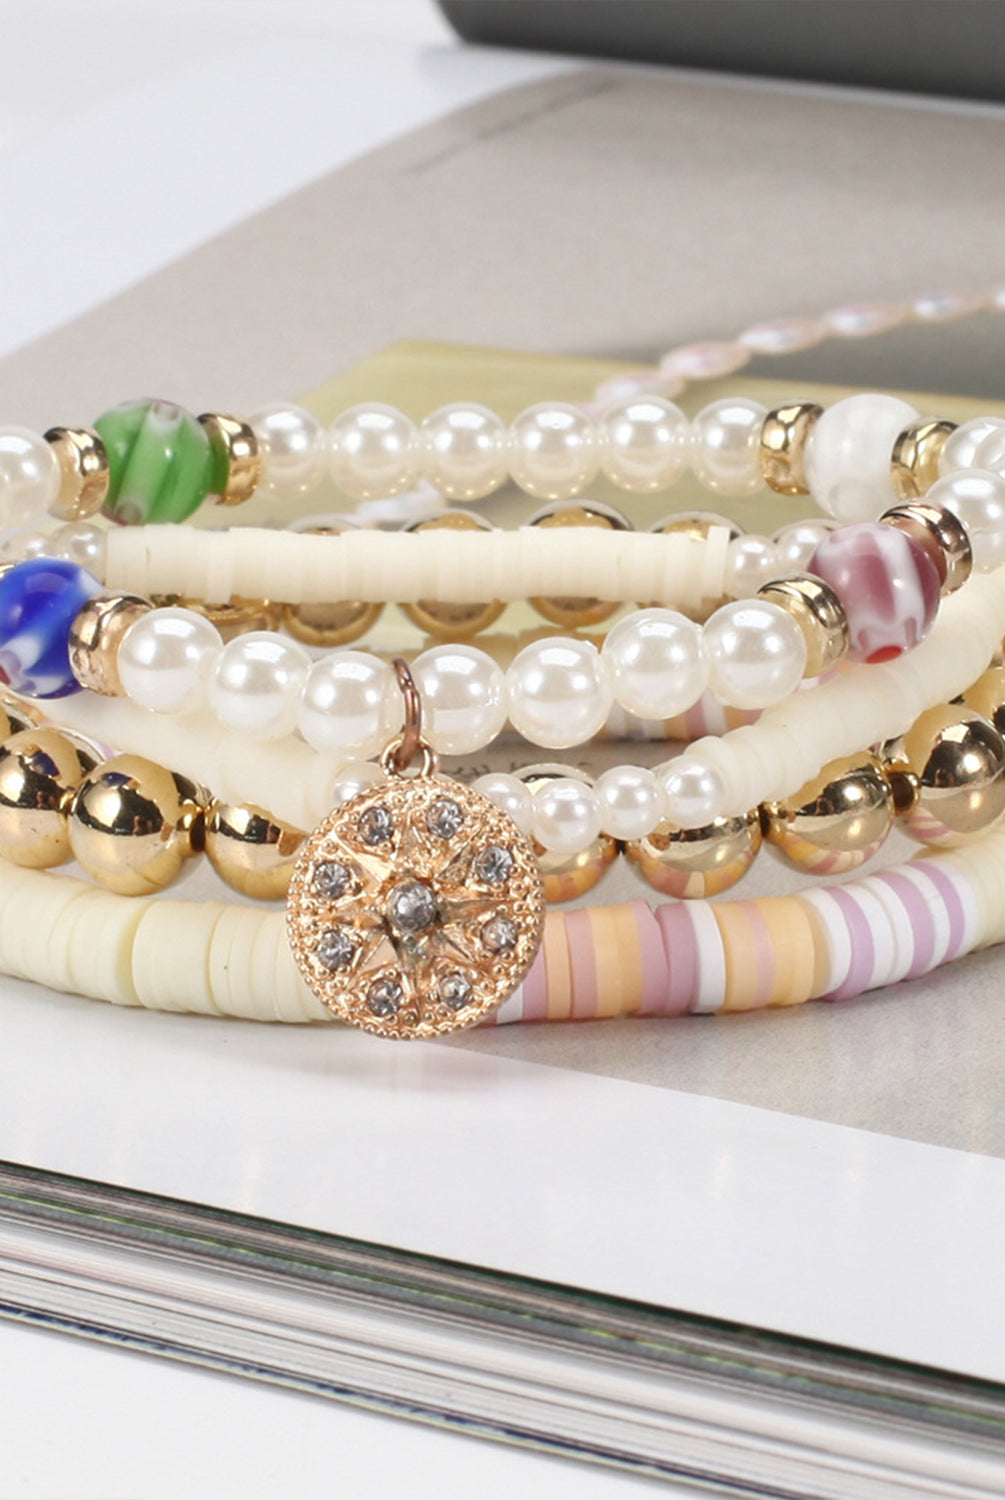 Elegant soft pottery bead bracelet with pearls, gold spheres, and a central sparkling charm.